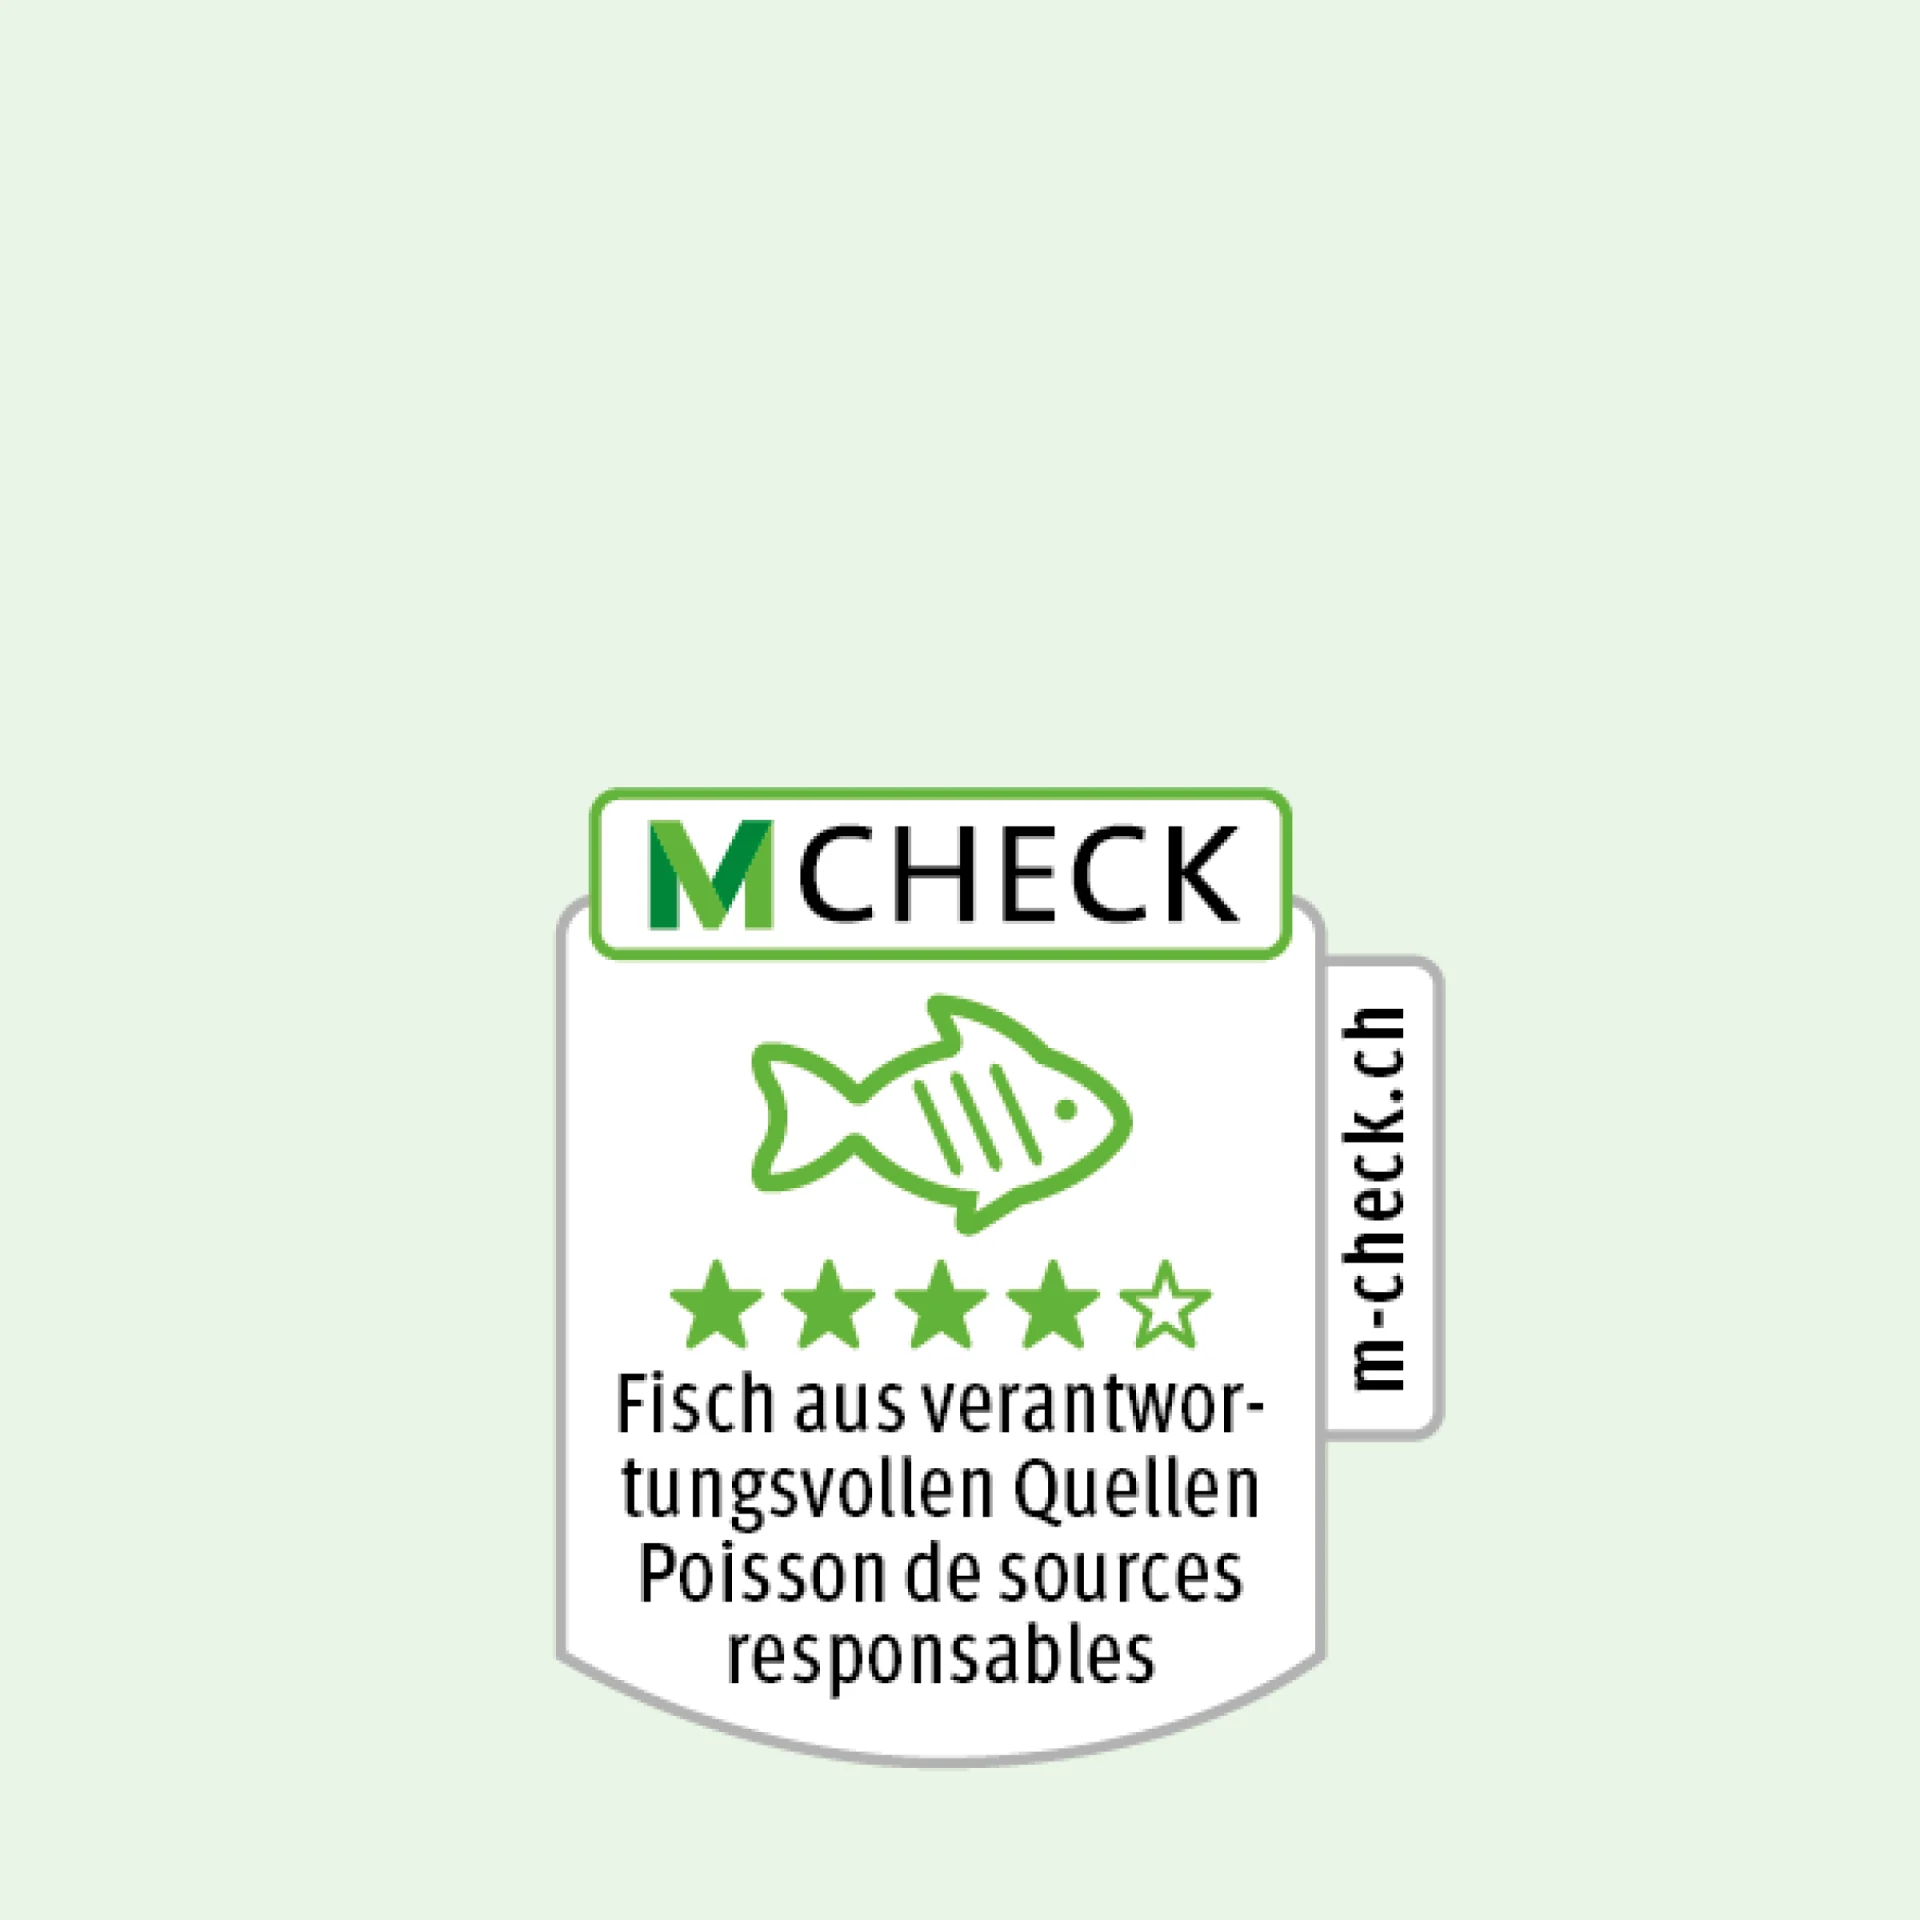 M-Check icon with a fish and, below this, four stars for responsibly sourced fish